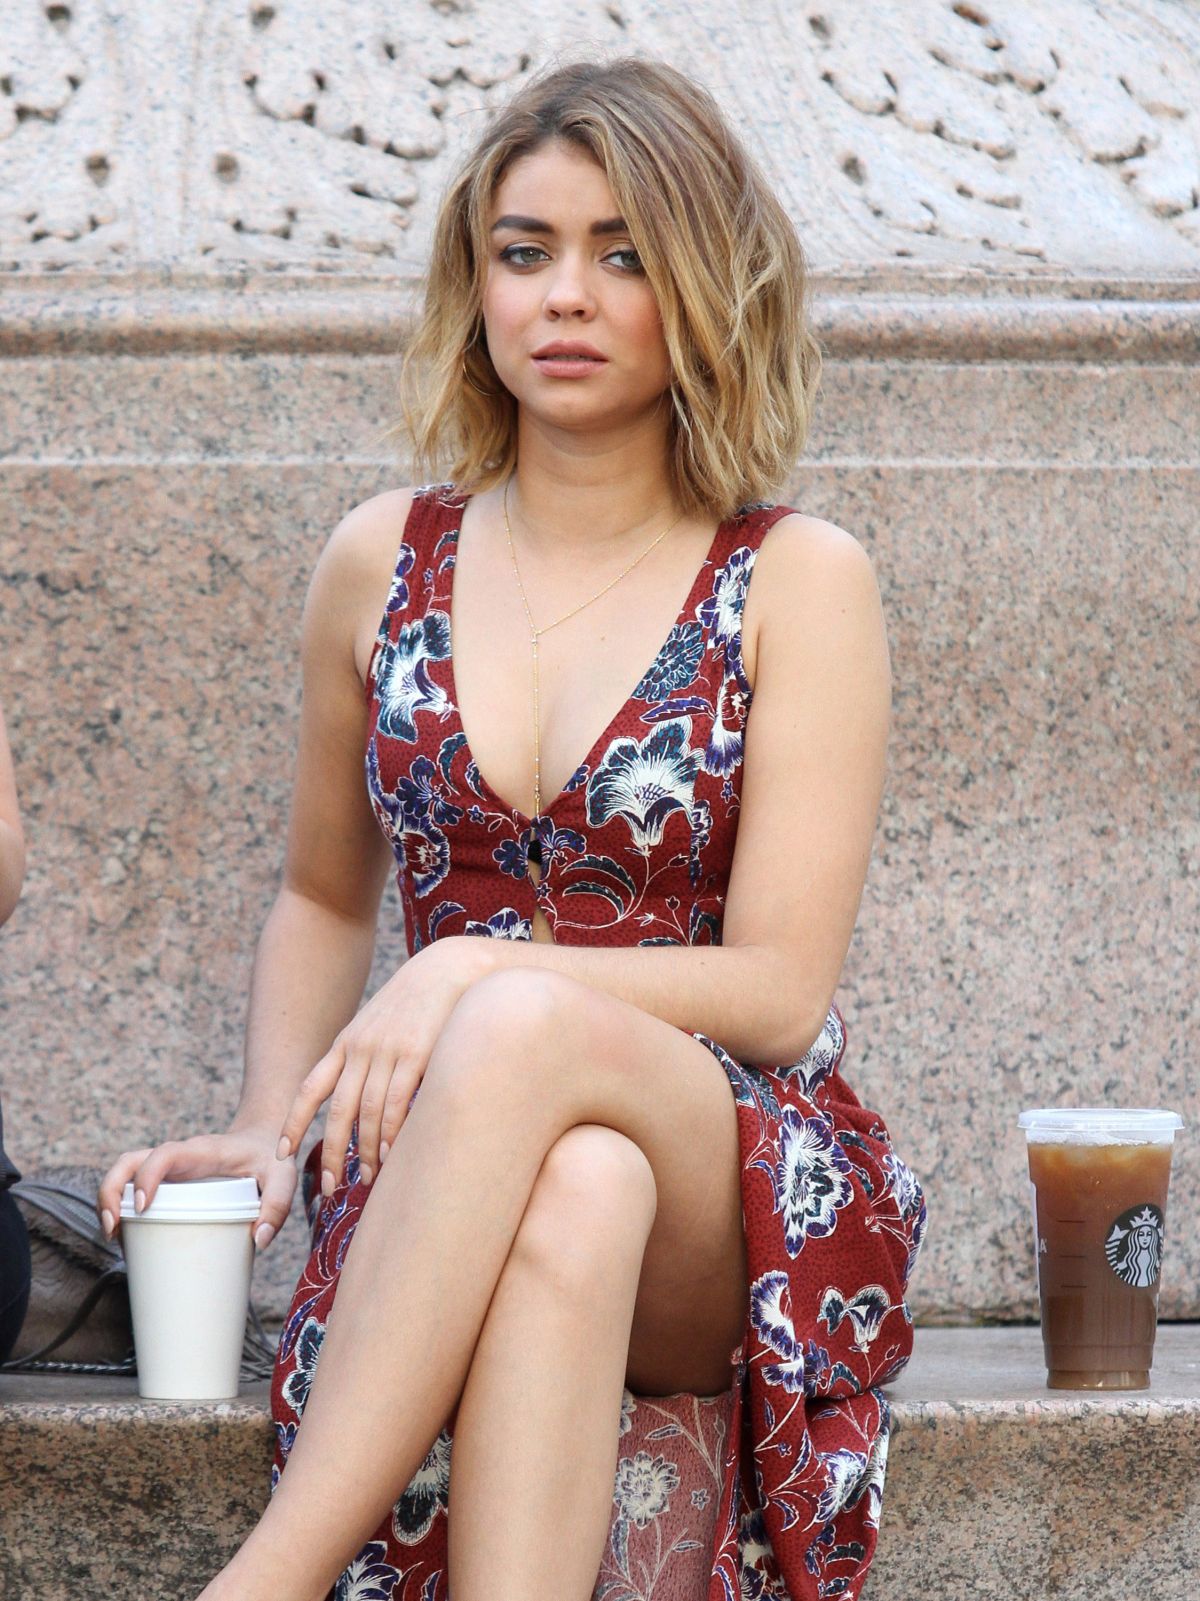 sarah-hyland-and-ariel-winter-on-the-set-of-modern-family-in-new-york-08-25-2016_20.jpg